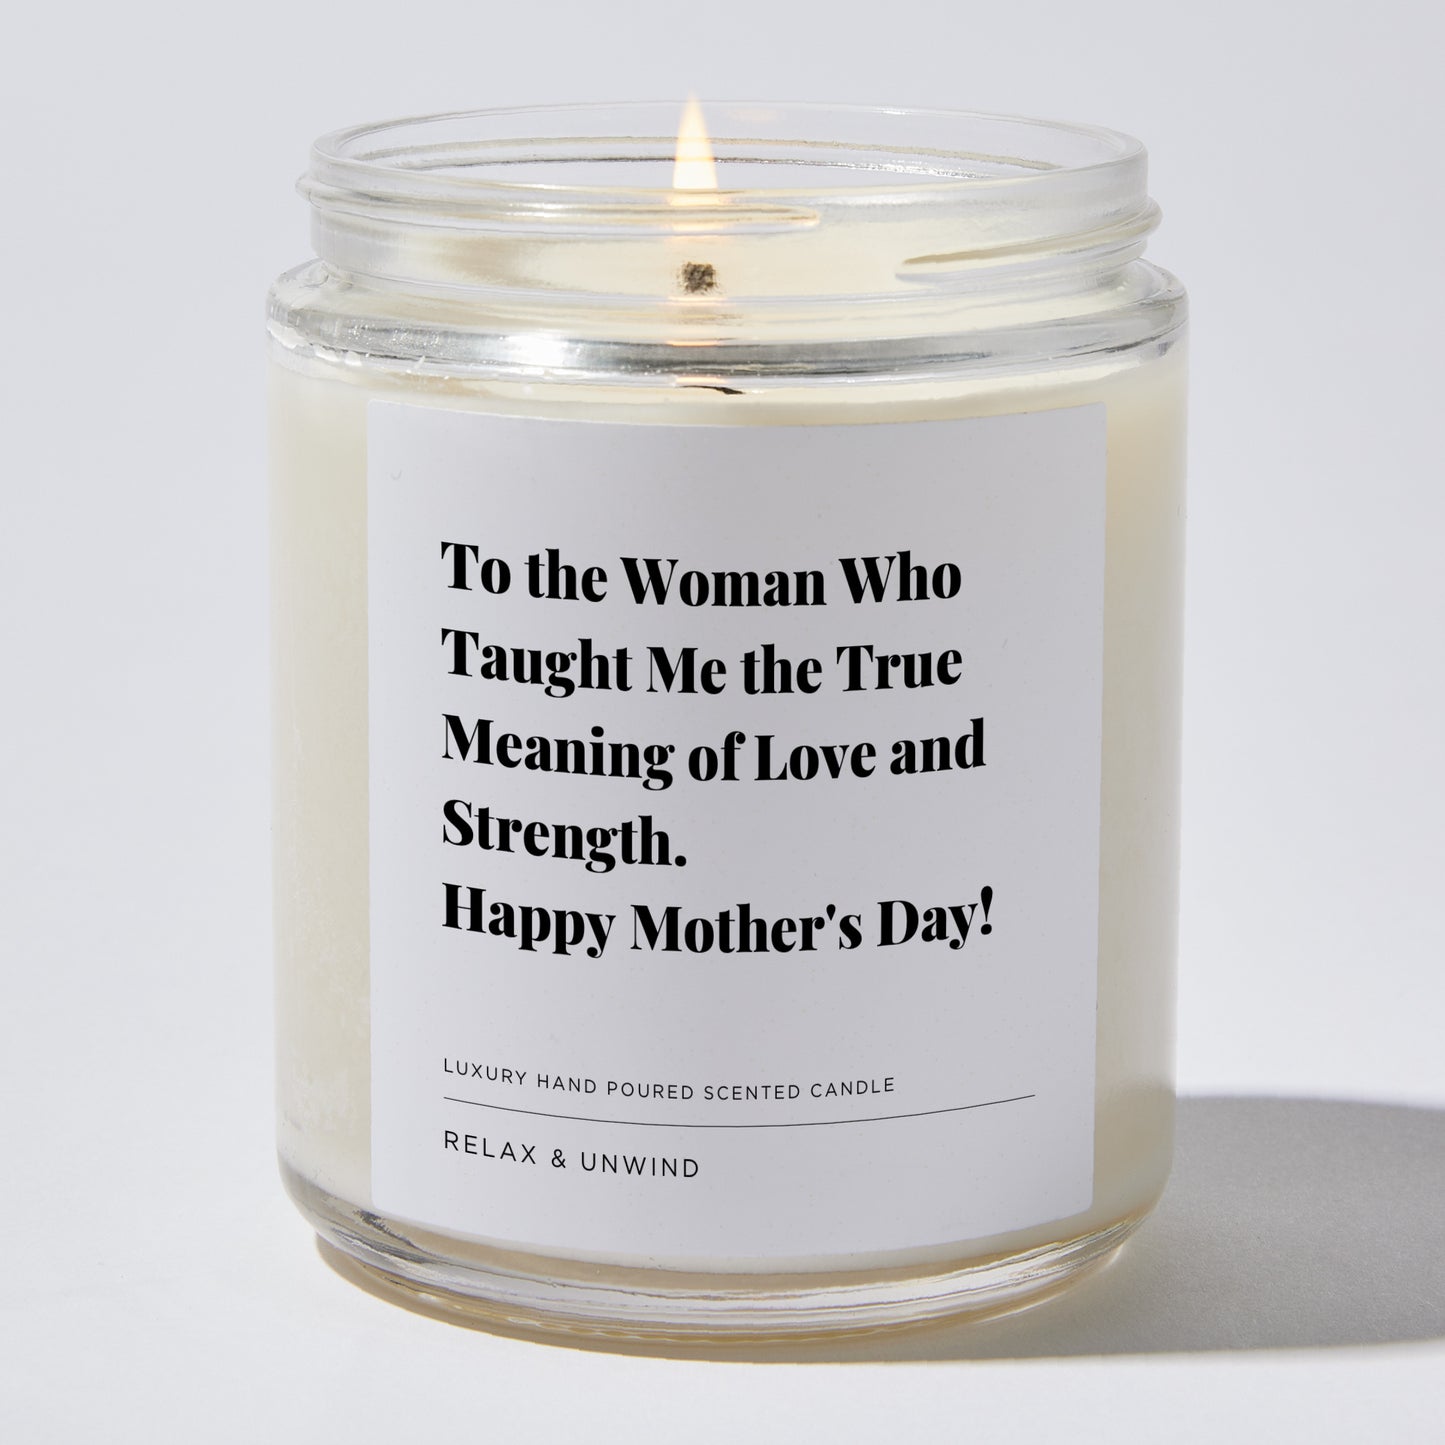 Gift for Mom - To the woman who taught me the true meaning of love and strength. Happy Mother's Day! - Candle